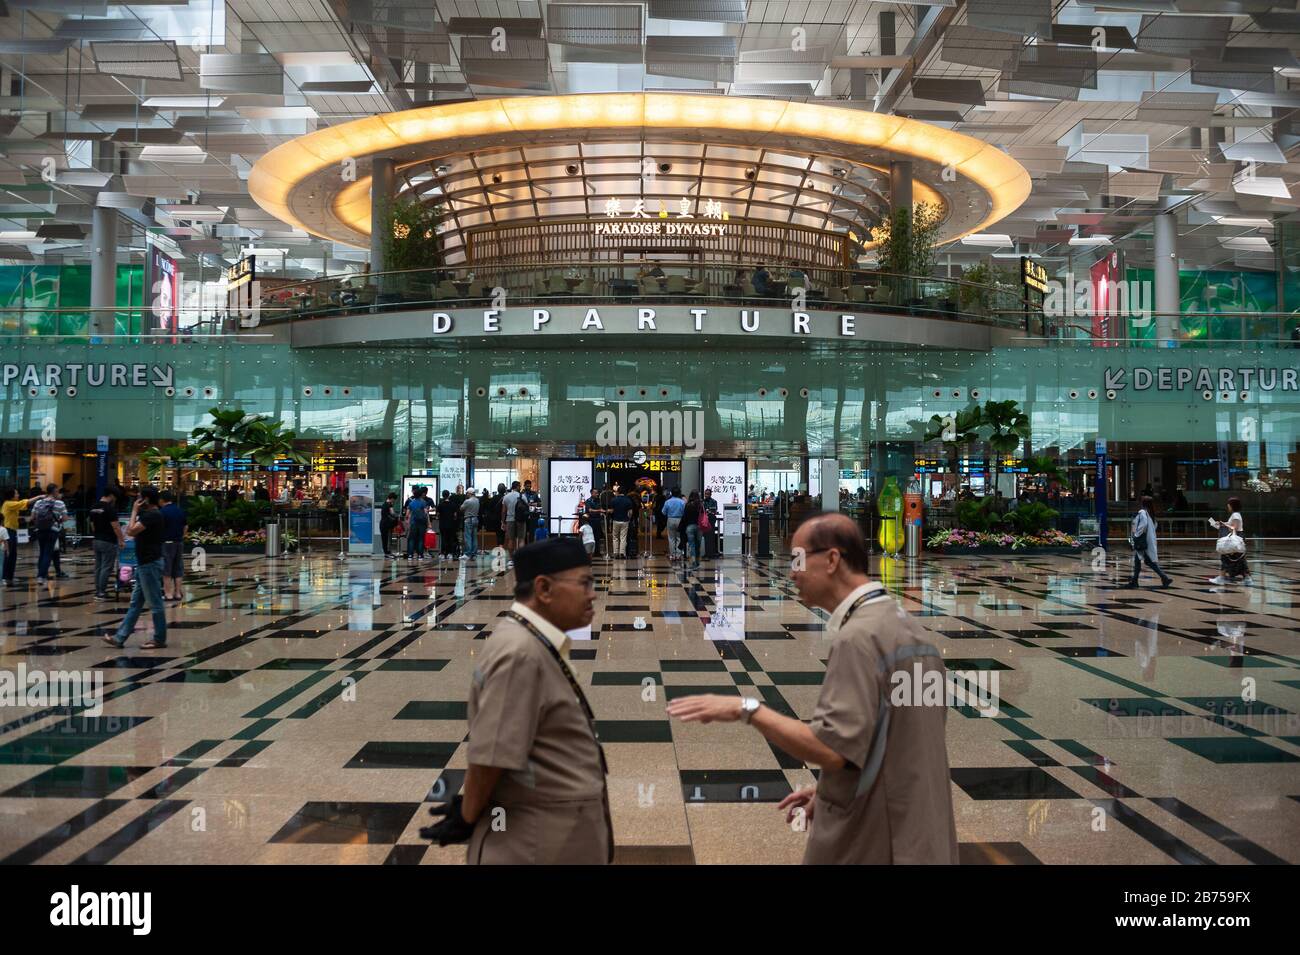 01.03.2019, Singapore, Republic of Singapore, Asia - Two airport employees are chatting in the departure hall of Terminal 3 at Changi Airport. [automated translation] Stock Photo